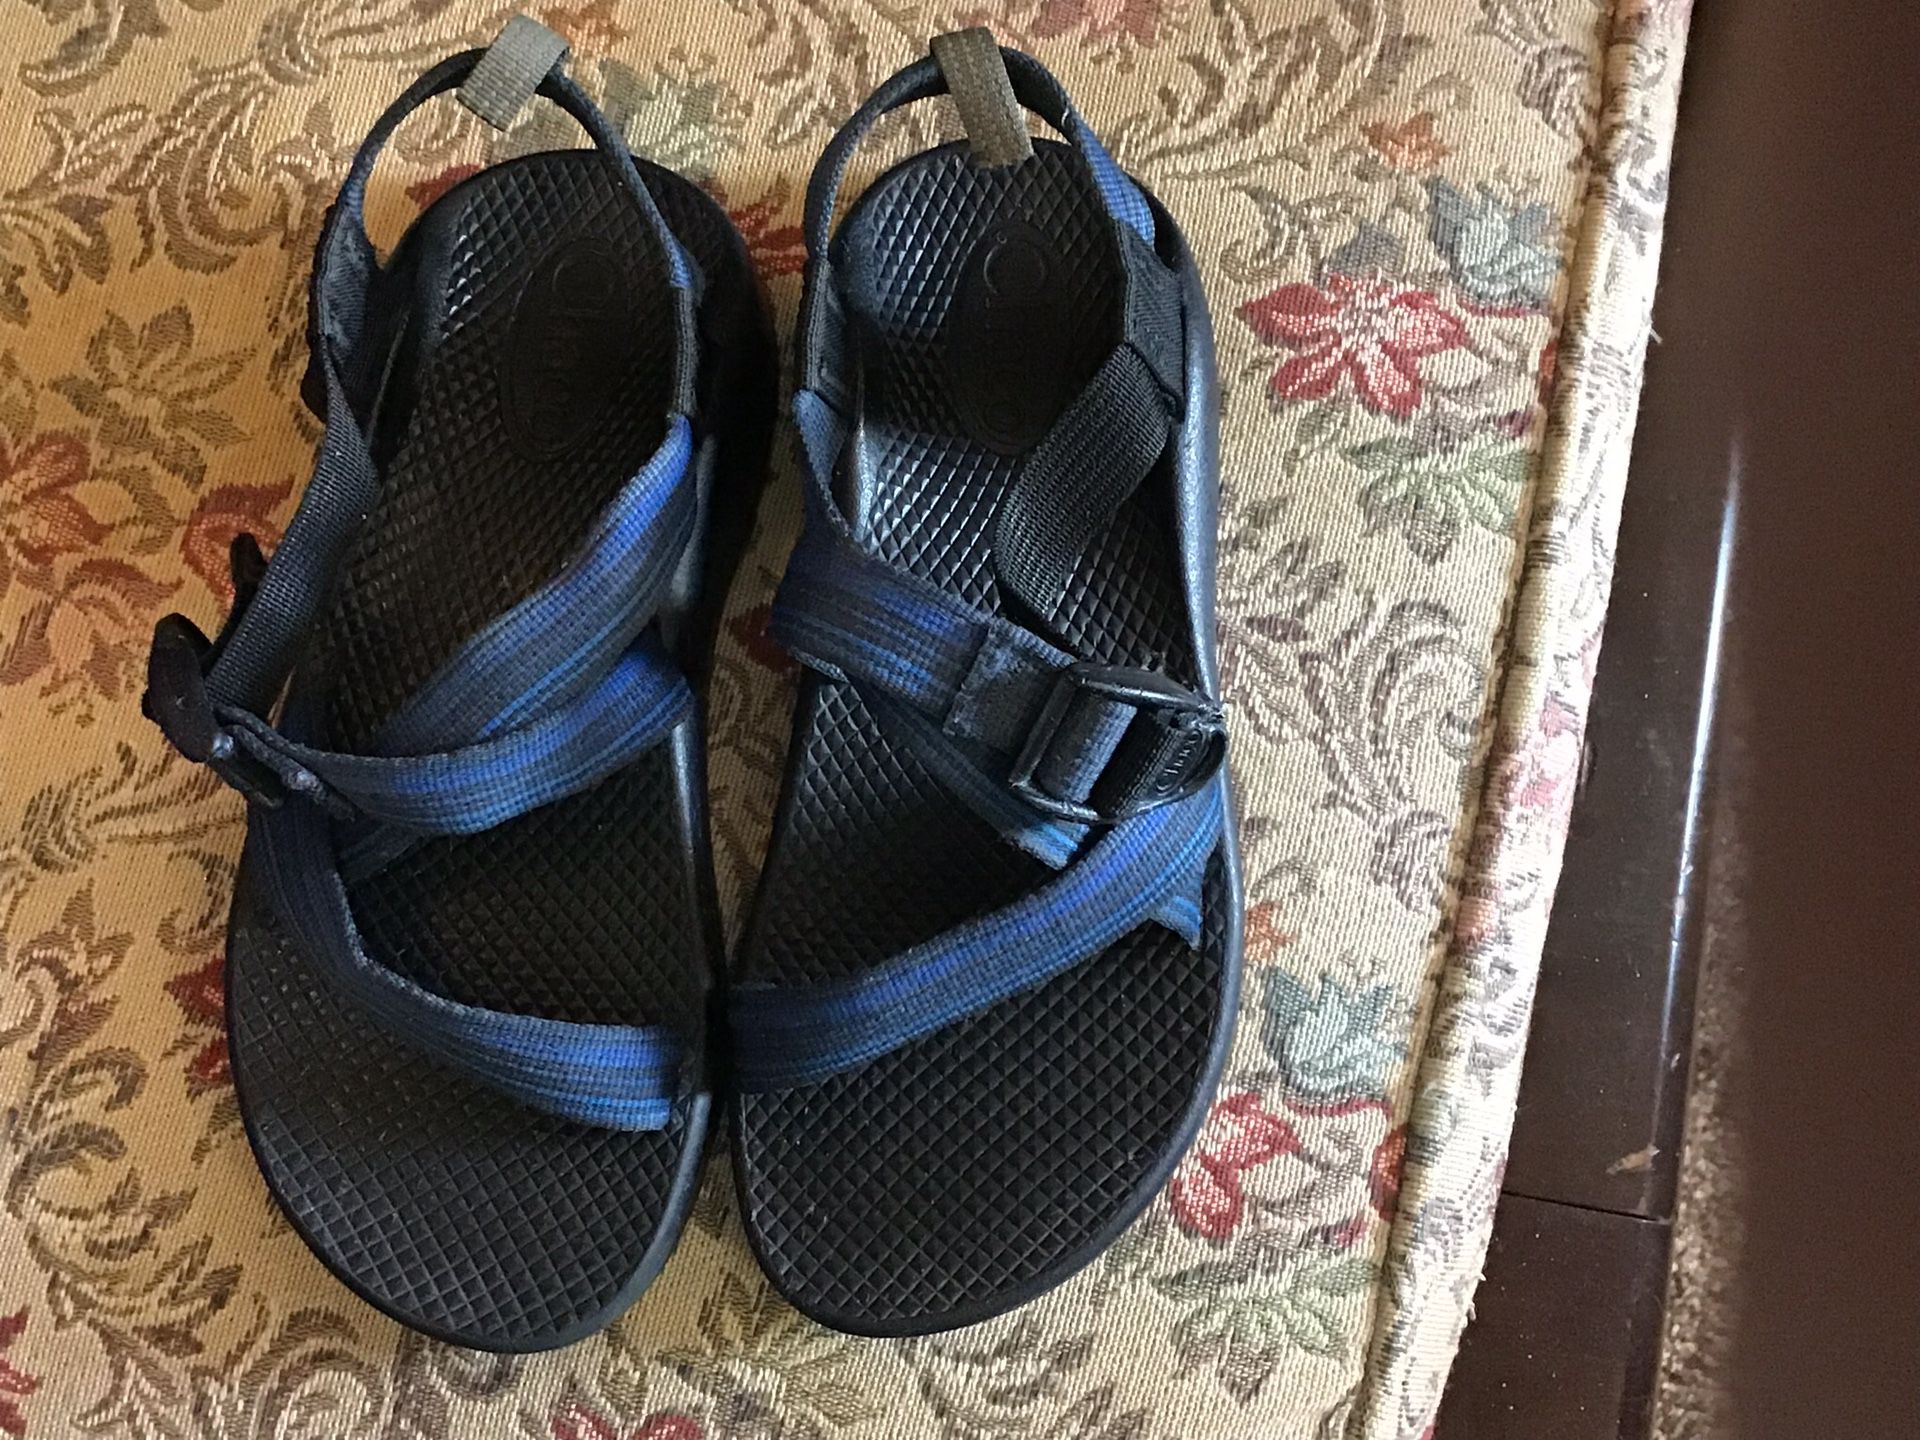 Kids size 4 chacos